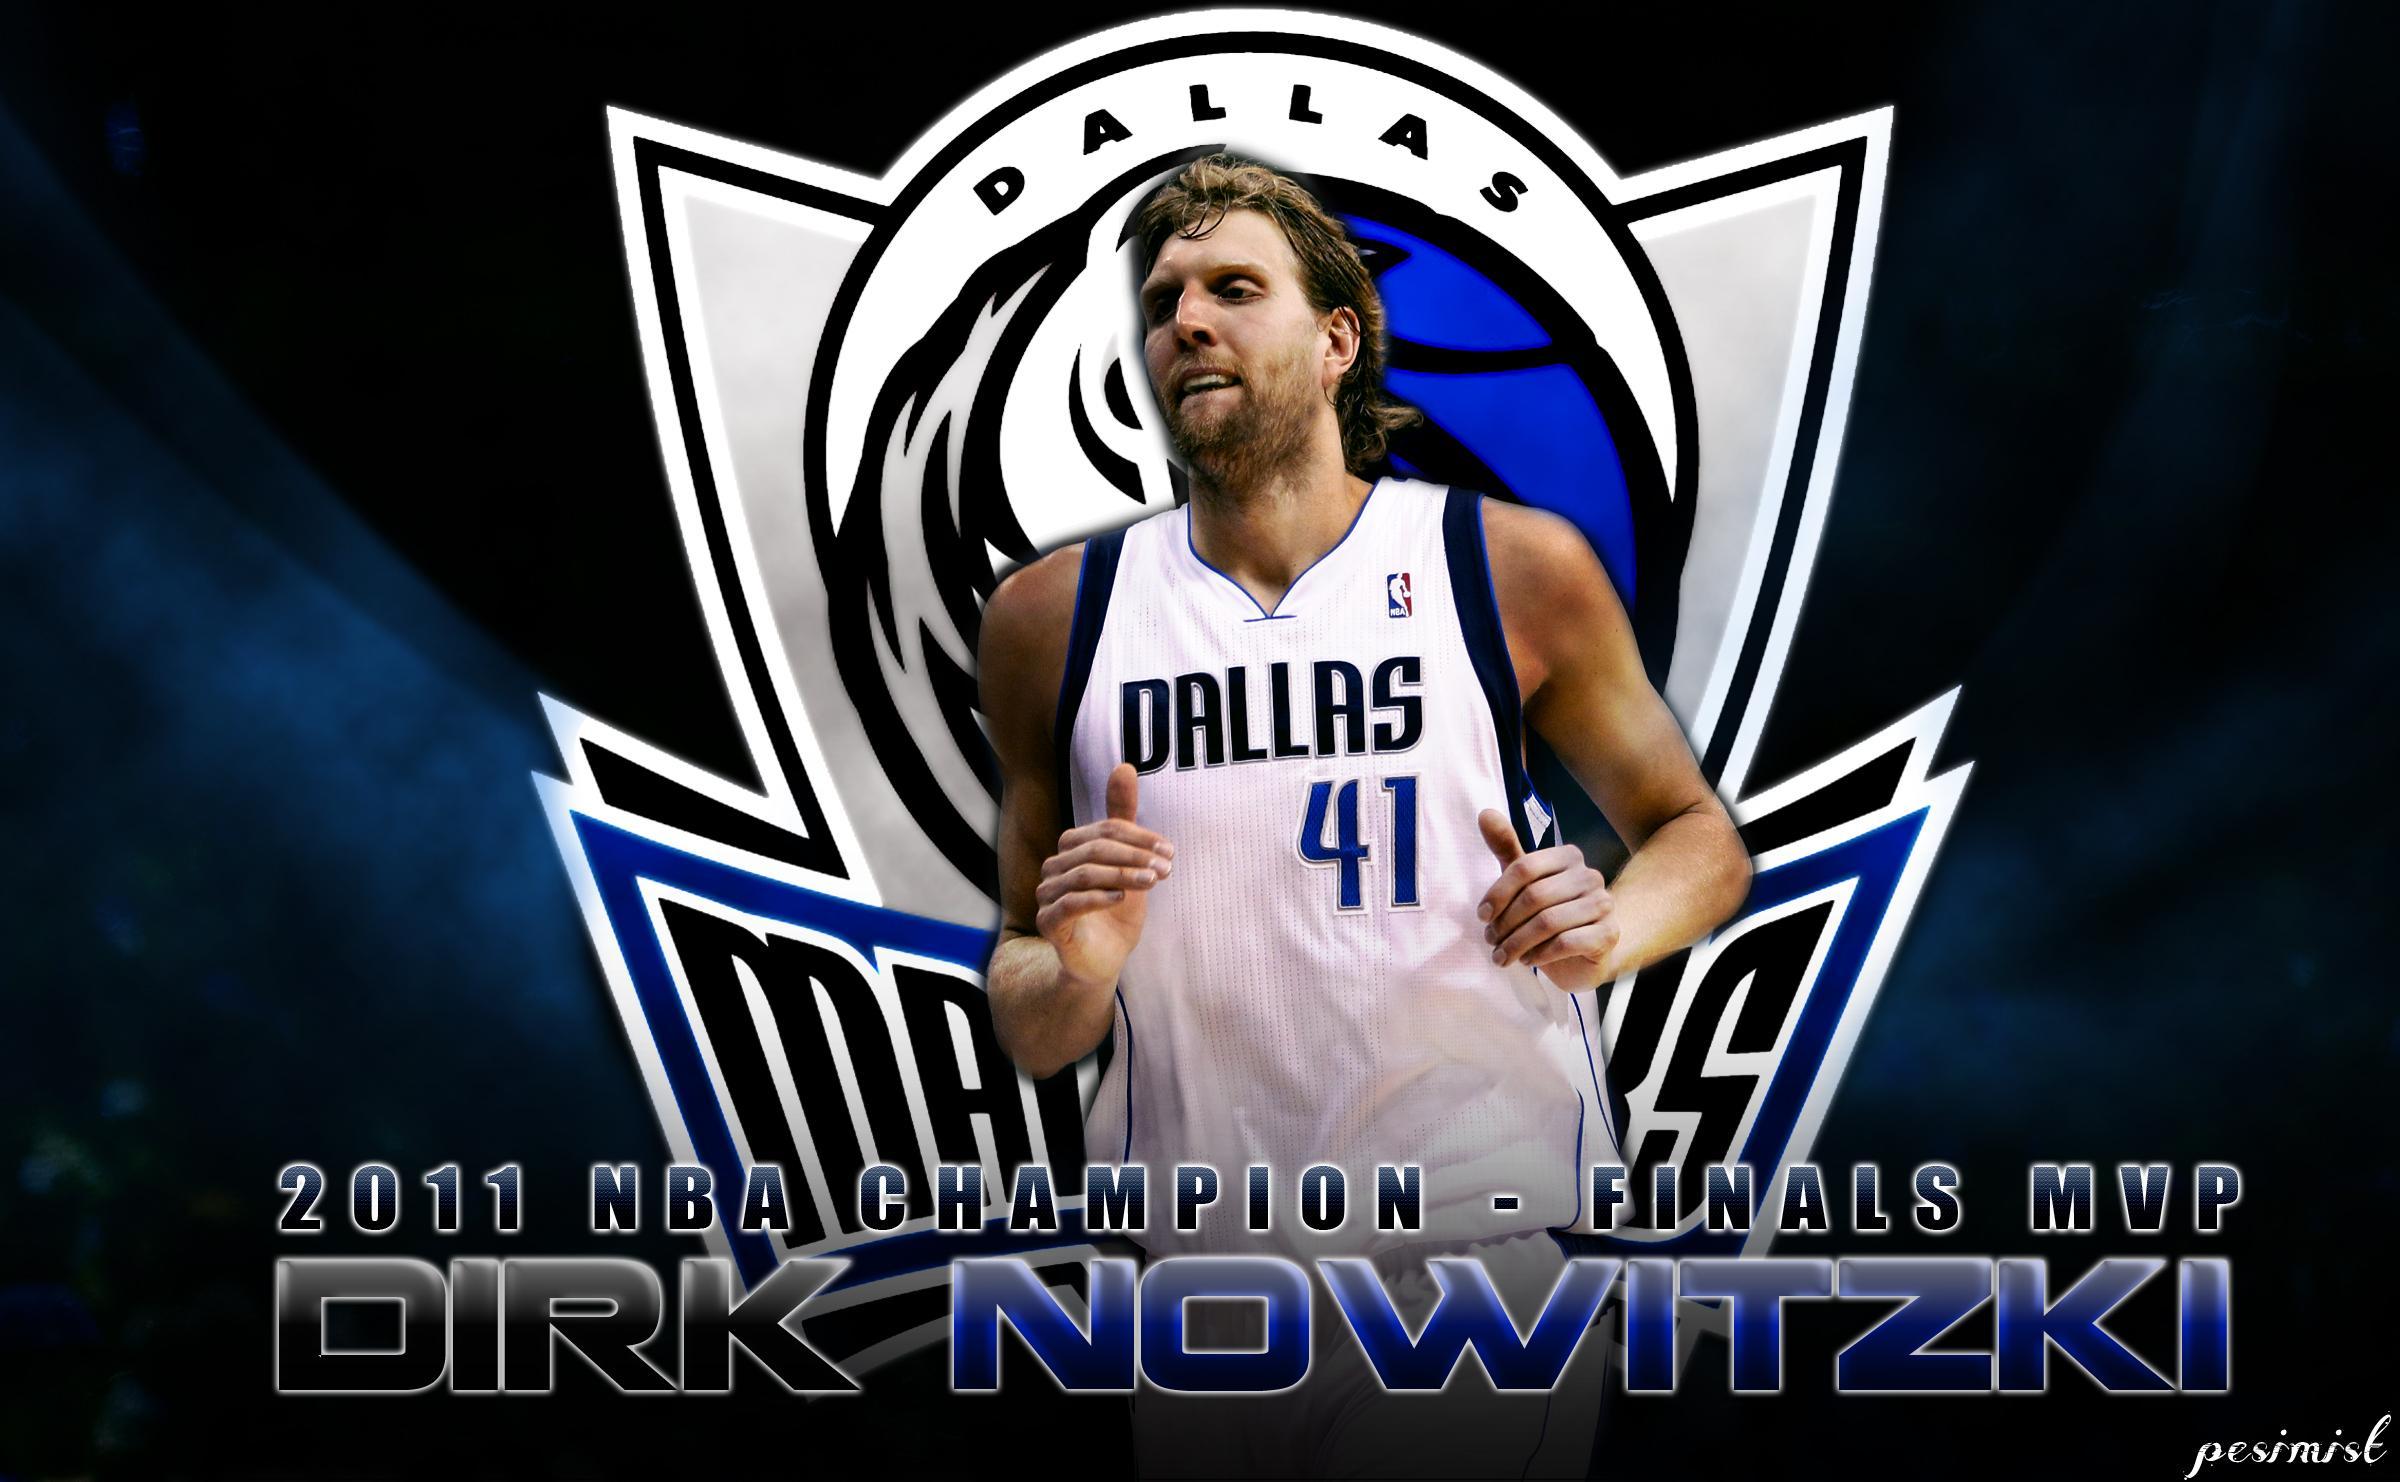 Collection of Dirk Nowitzki Wallpaper (image in Collection)